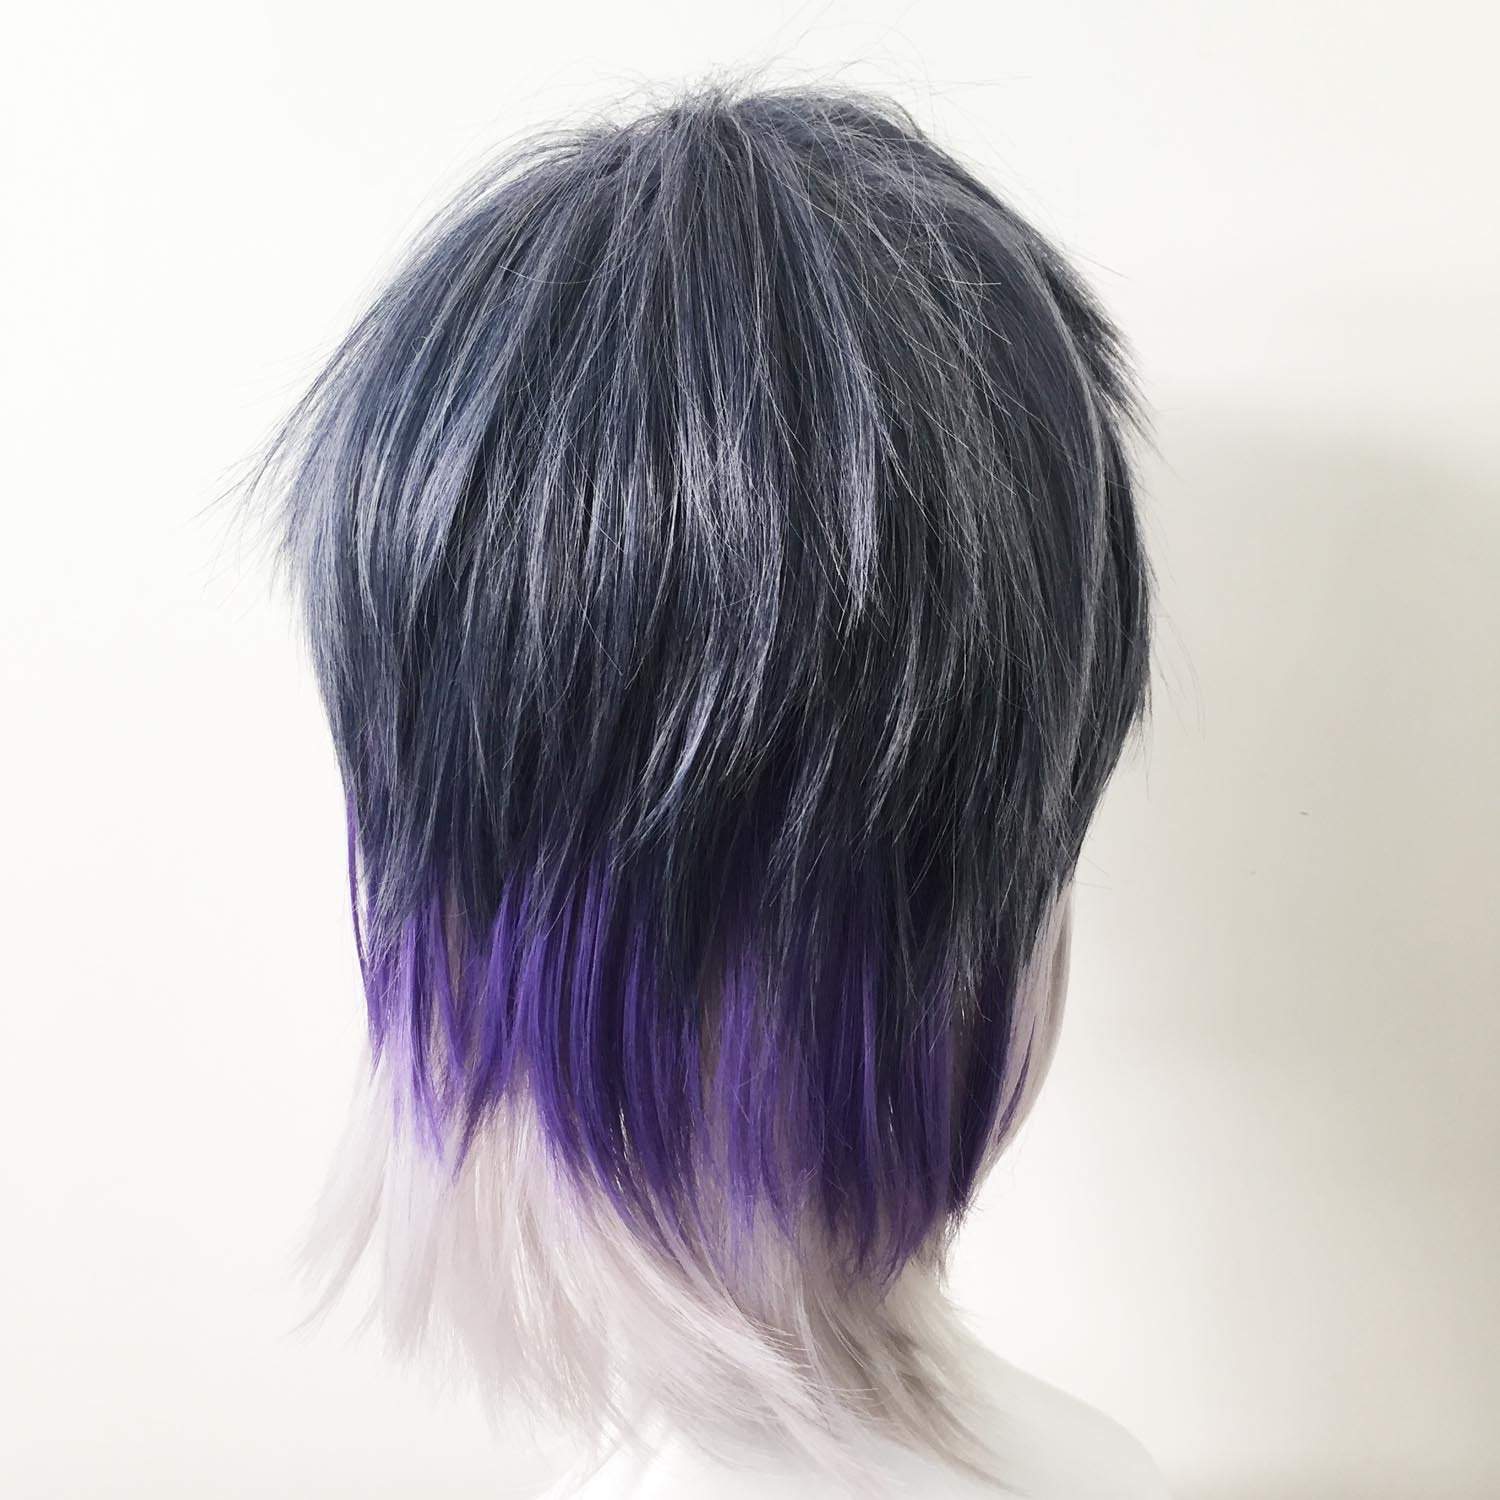 nevermindyrhead Men Purple Grey Ombre Two Tone Short Straight Fringe Bangs Cosplay Wig